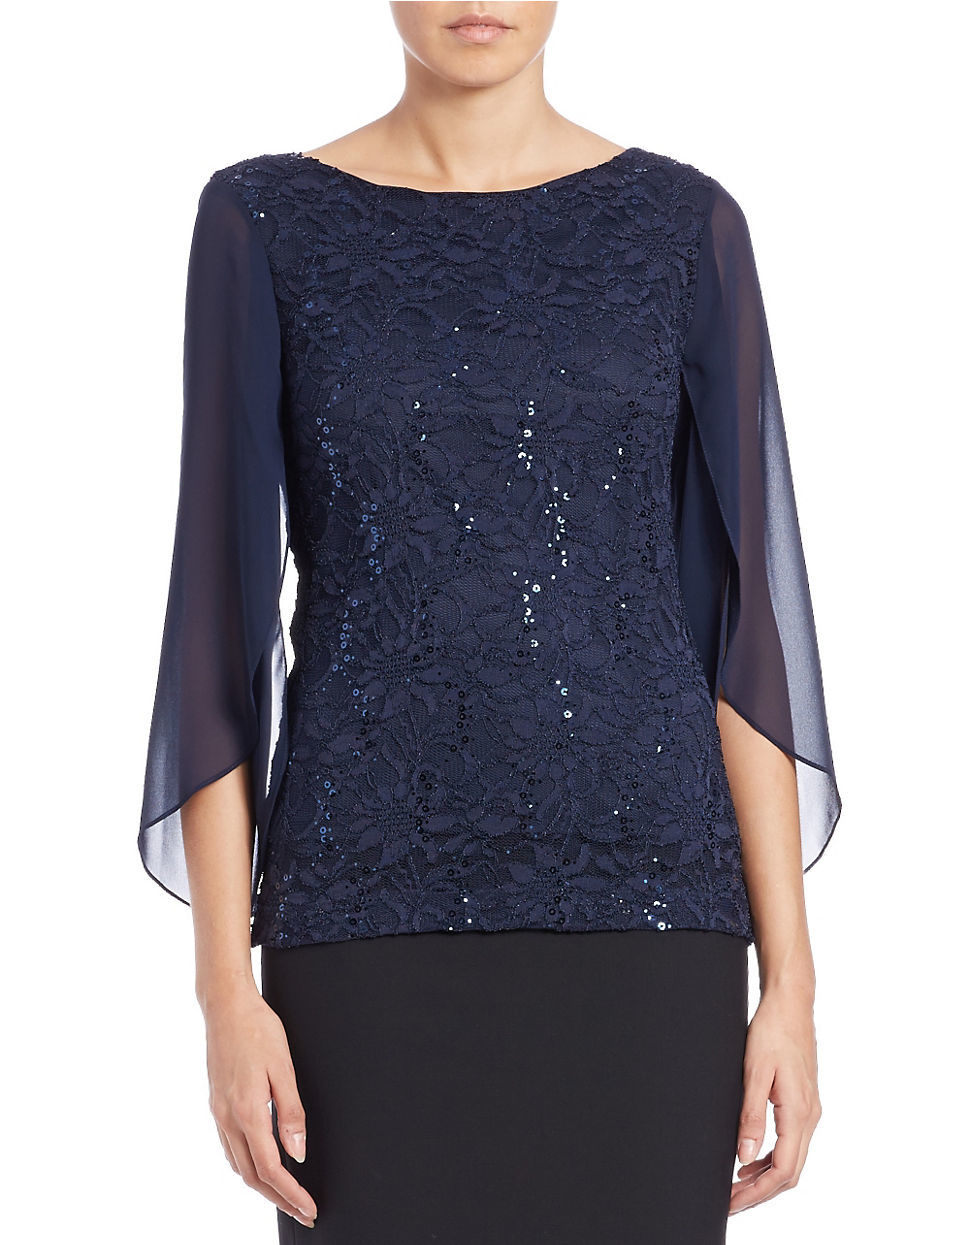 Lyst - Marina Sequin Lace Top in Blue